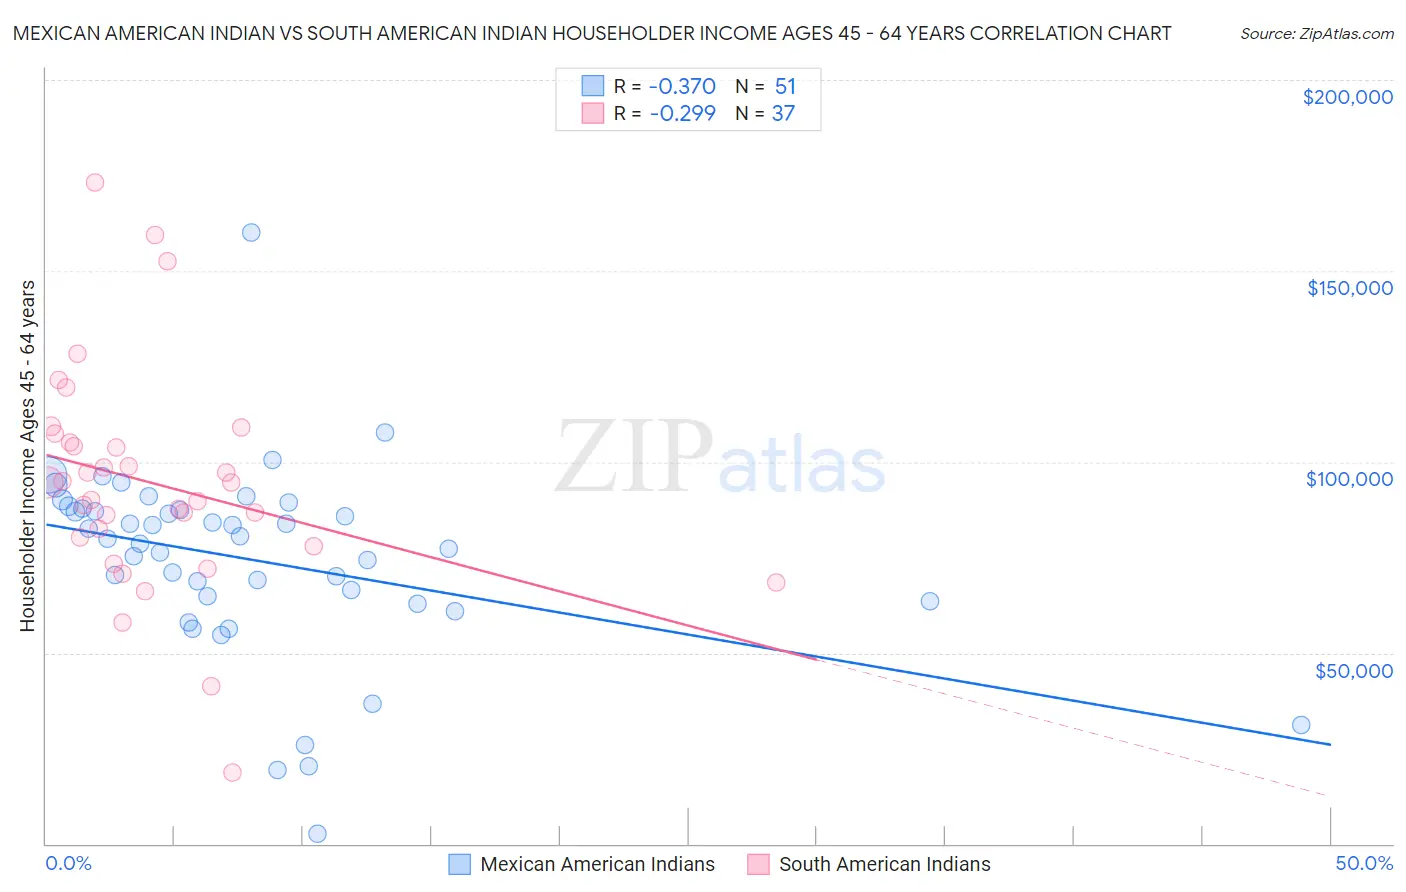 Mexican American Indian vs South American Indian Householder Income Ages 45 - 64 years